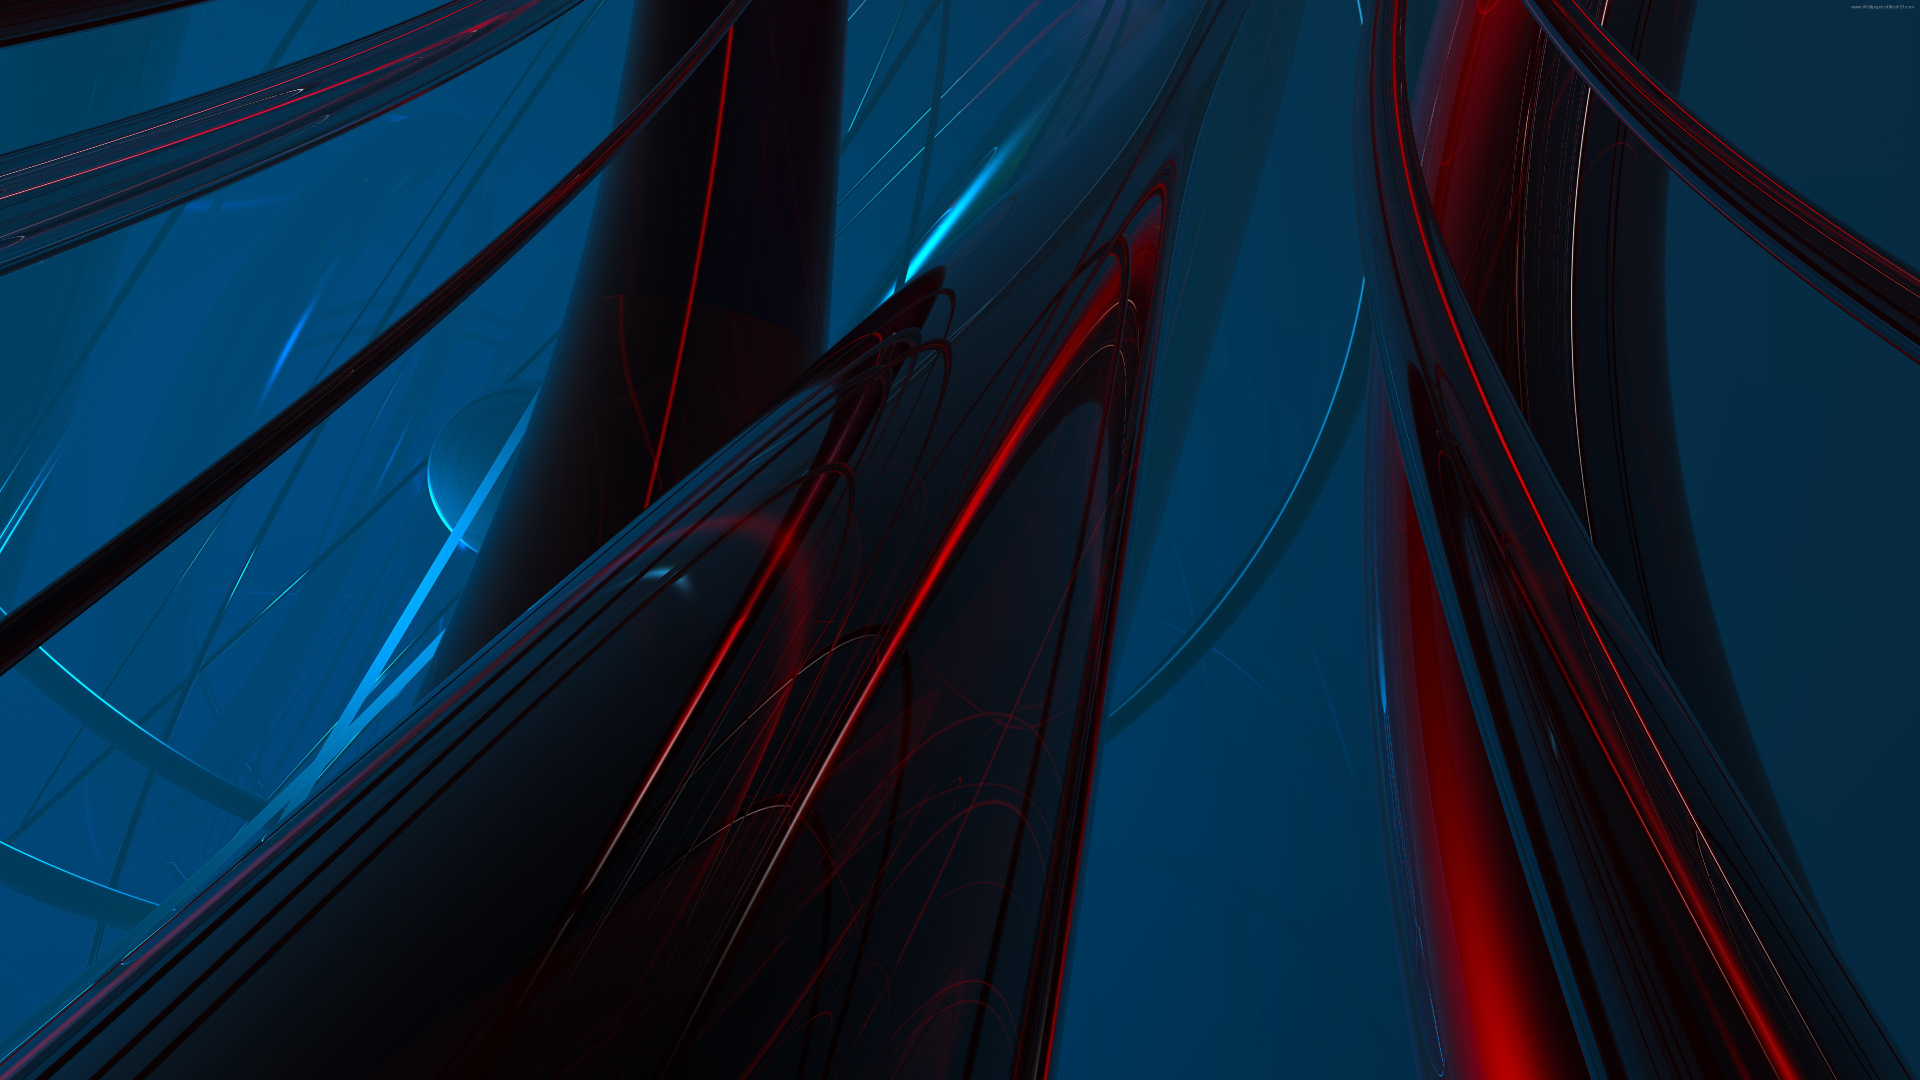 Blue and Red Light Streaks. Wallpaper in 1920x1080 Resolution